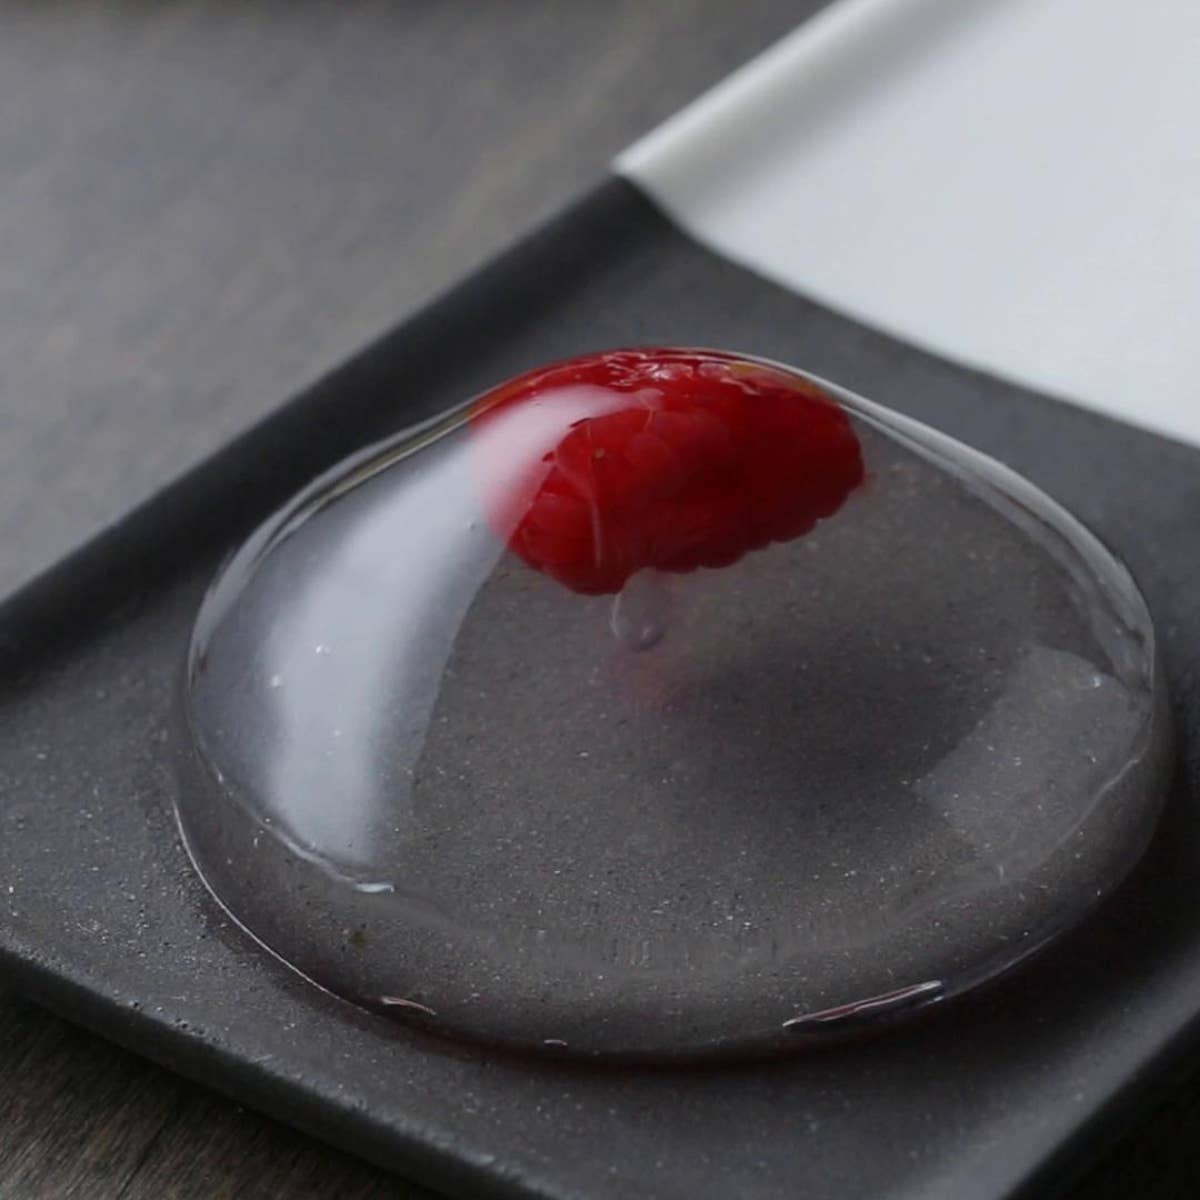 The Raindrop Cake Is Coming to America